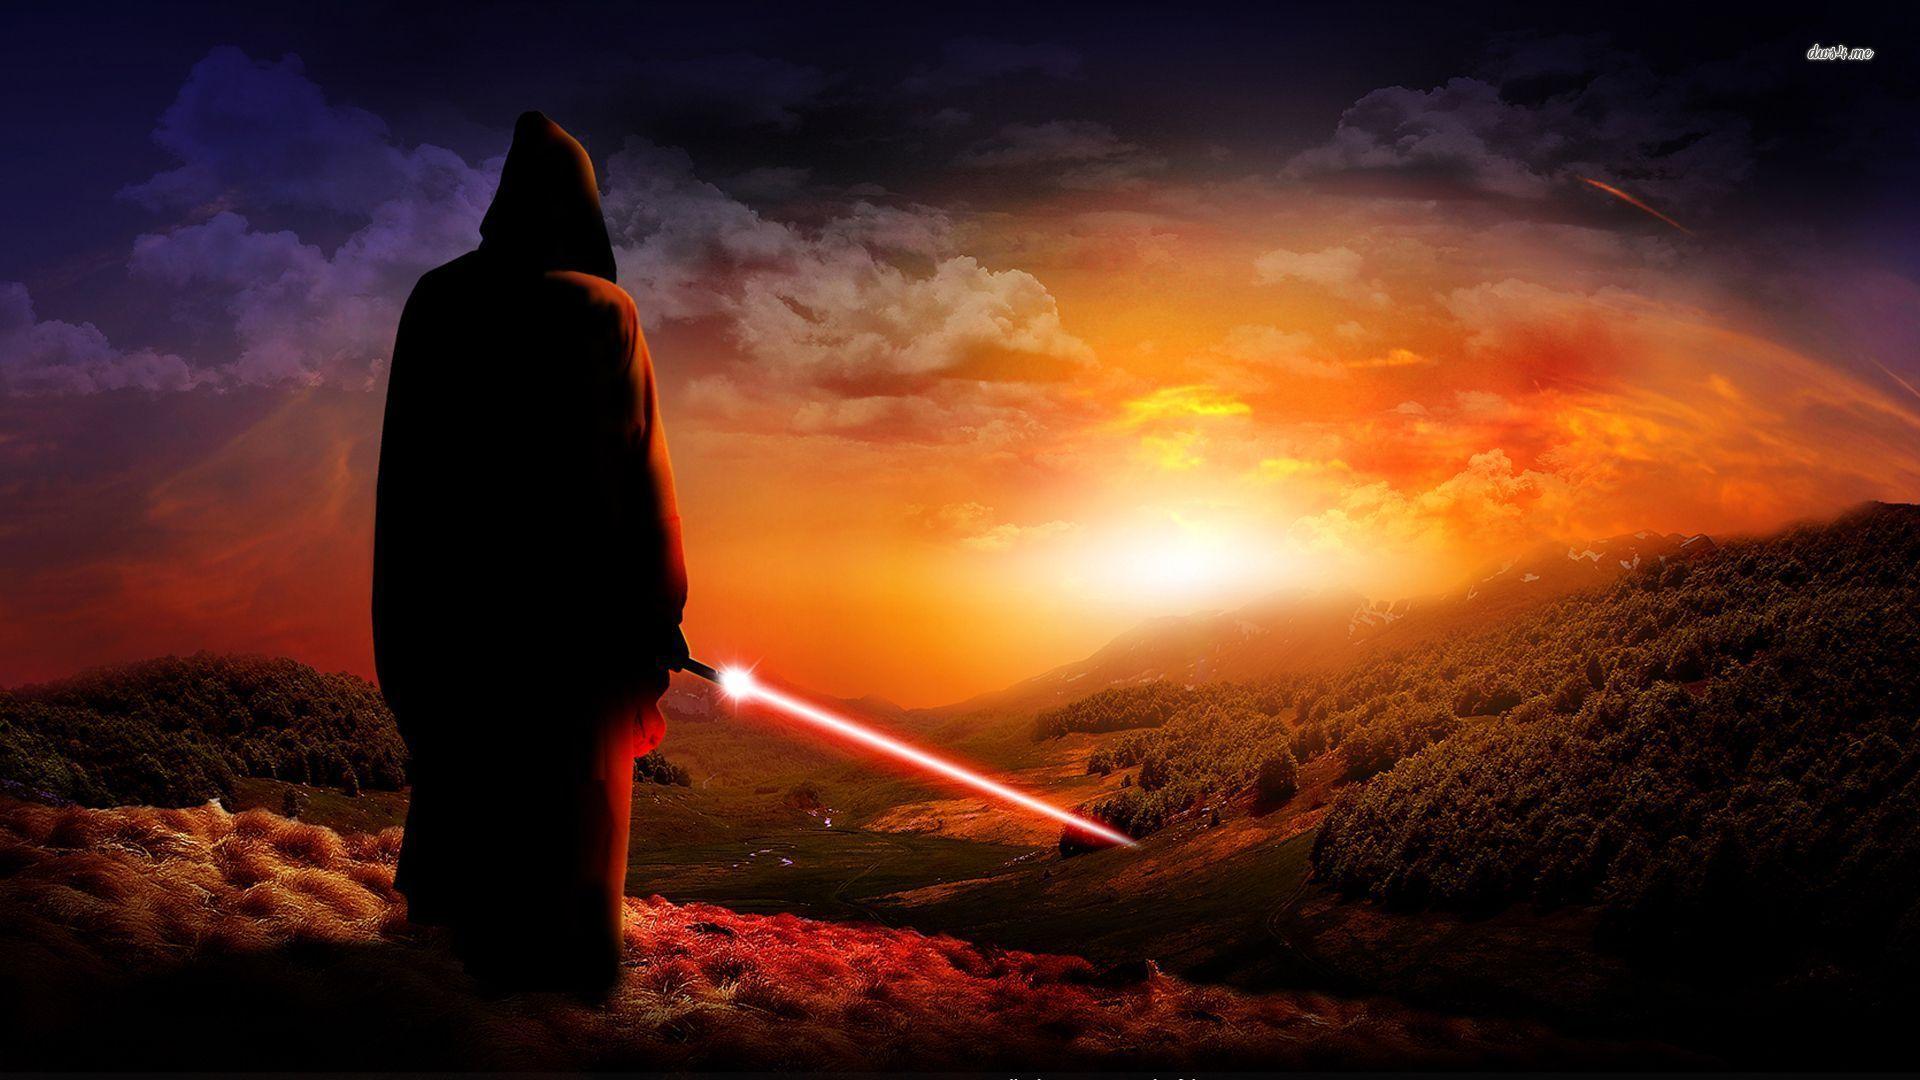 Free Star Wars Jedi Wallpaper For Android at Movies Monodomo